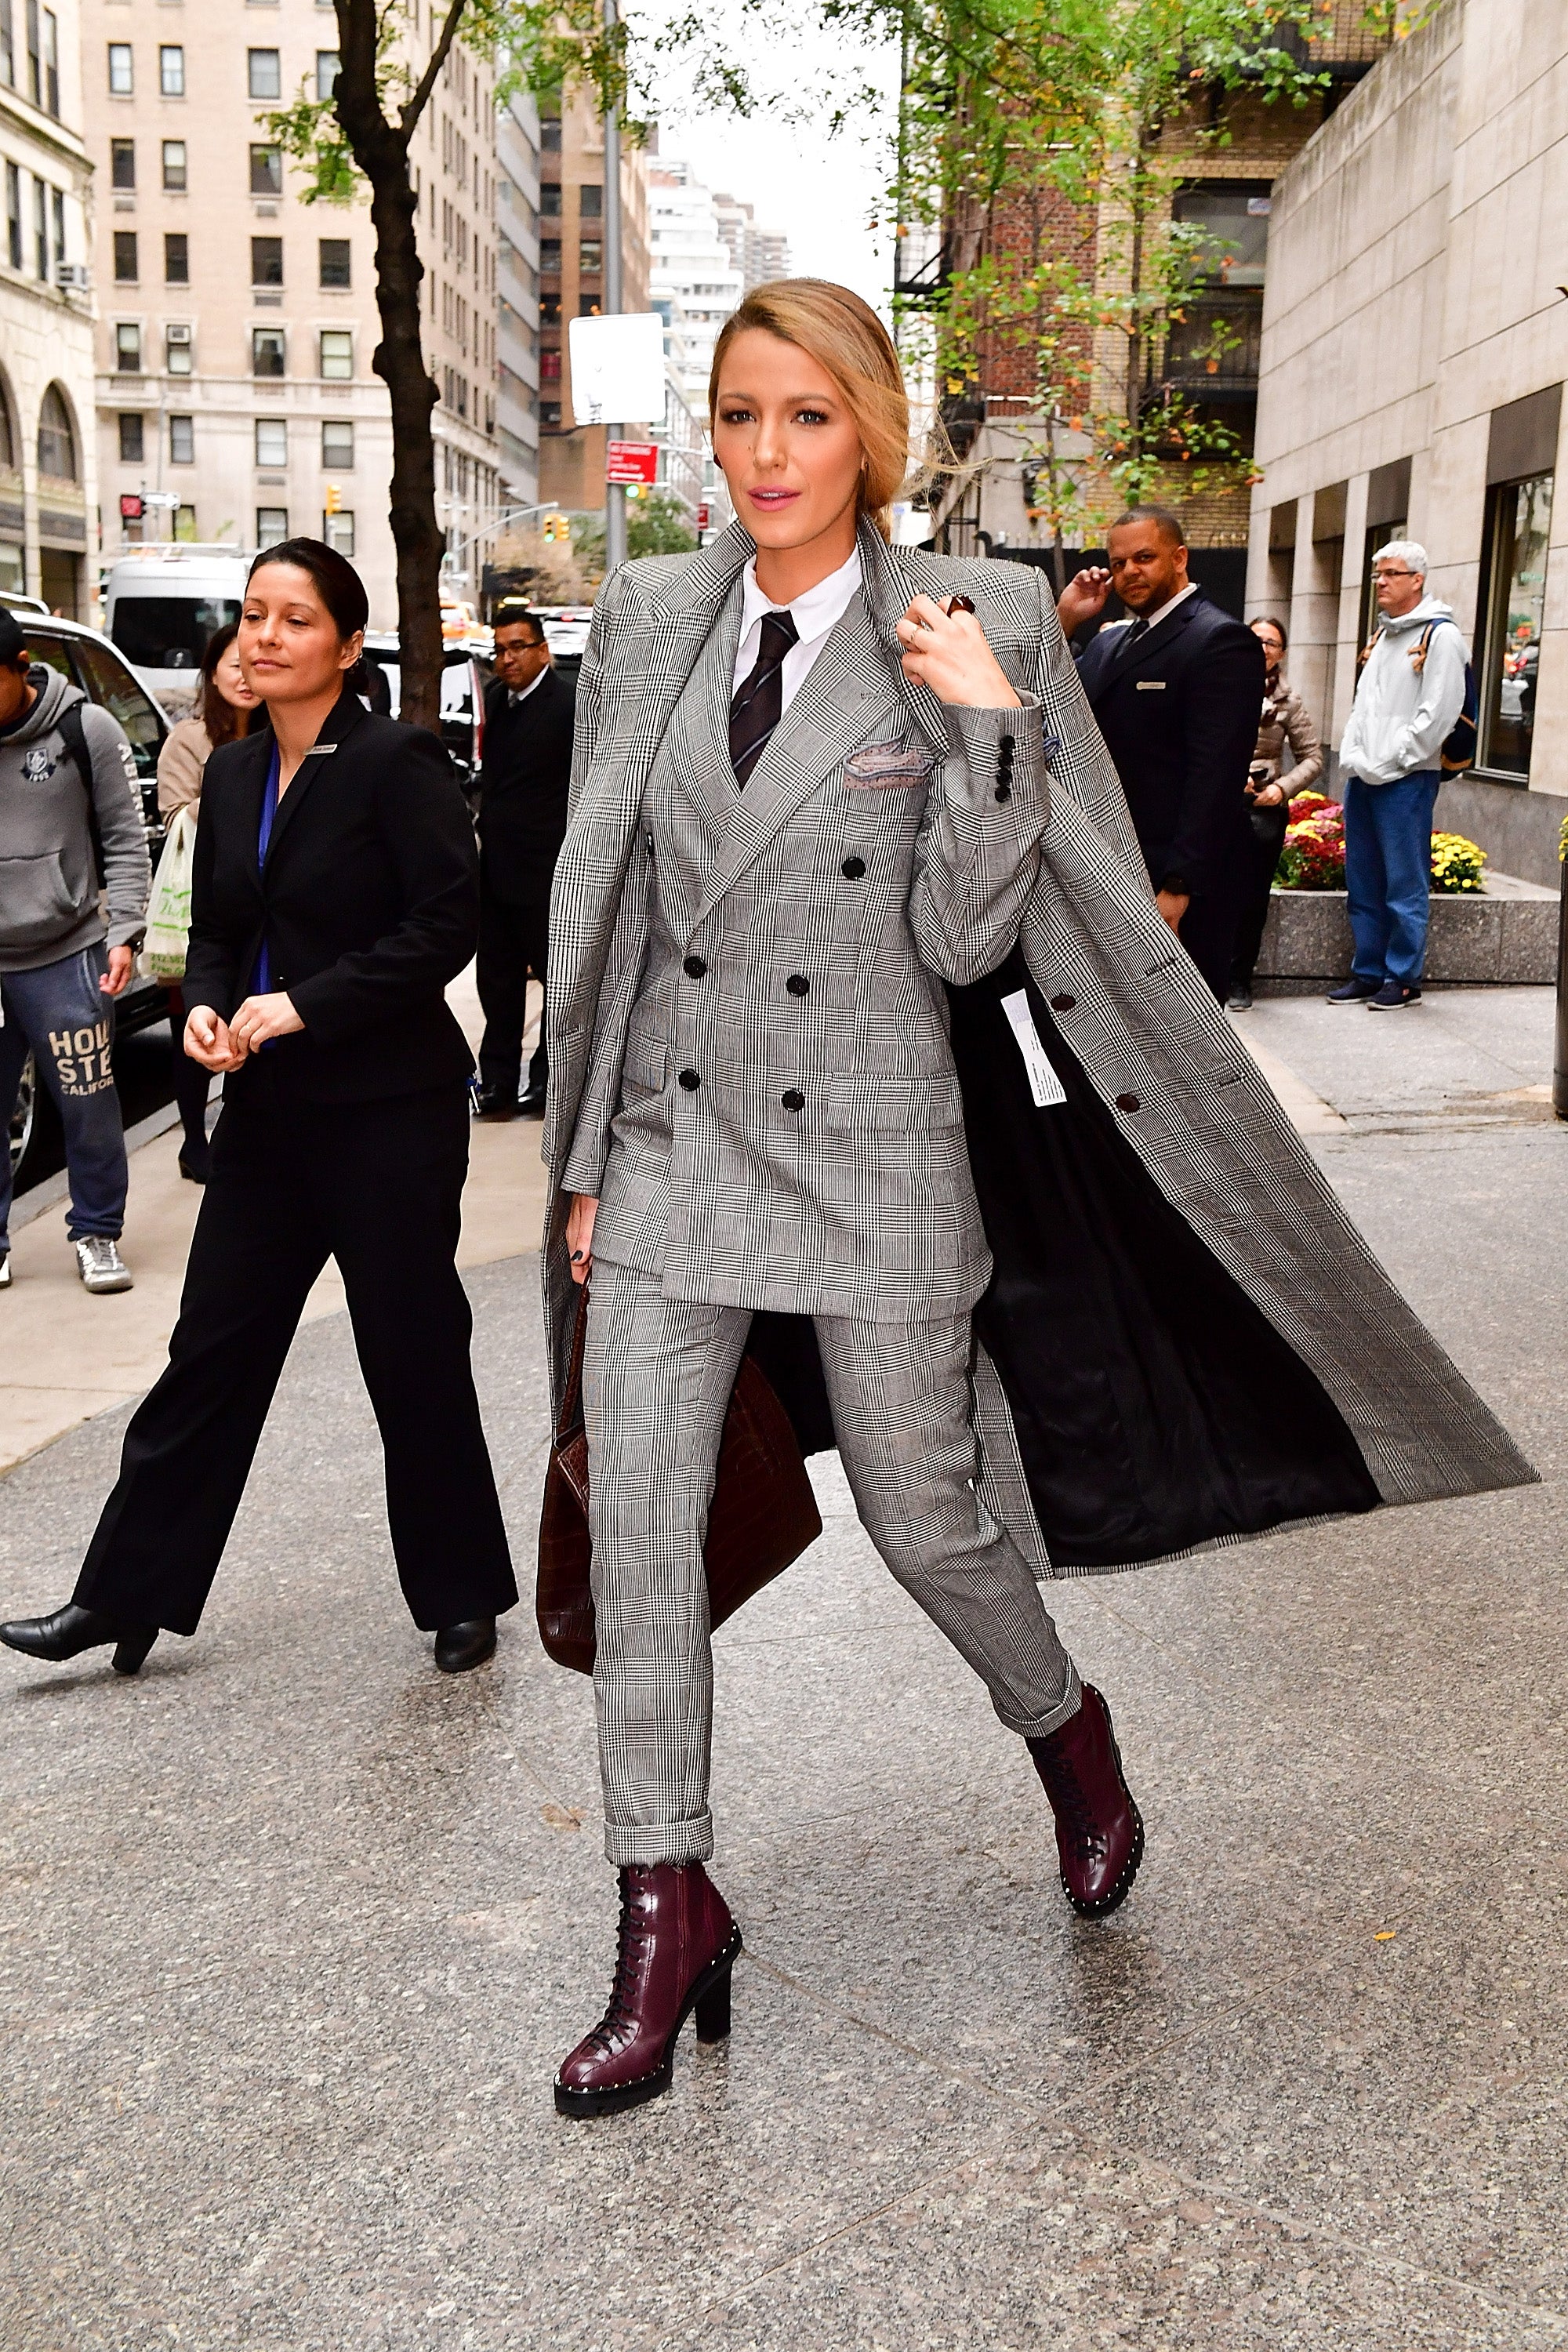 Blake Lively in NYC - suit